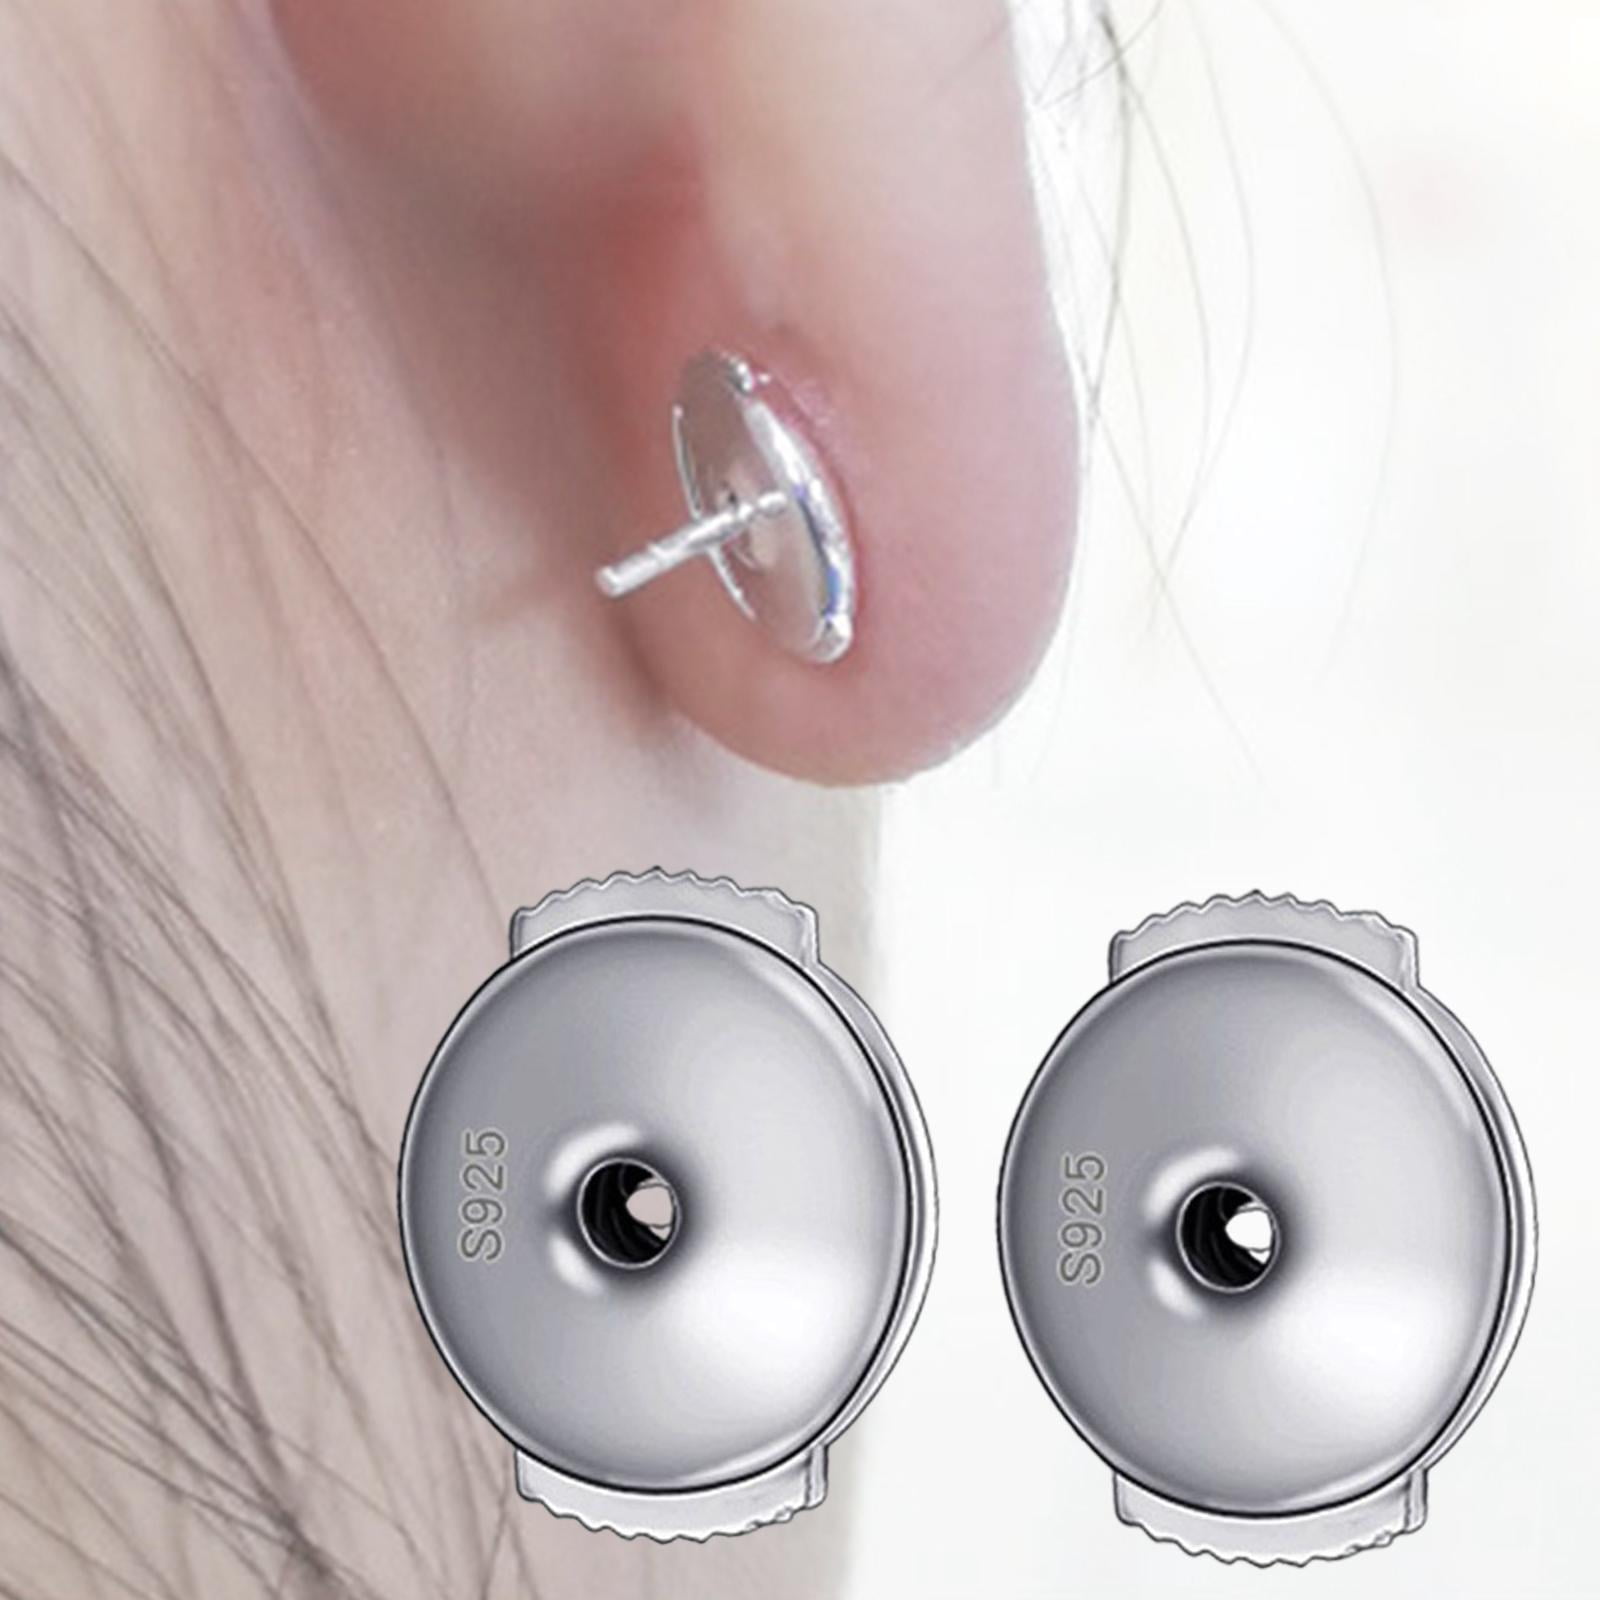 Earring Backs Replacements Plated Backs Locking Stoppers Earring Backs  Stopper Earring Ear Gifts DIY Earring Lovers 6mm White